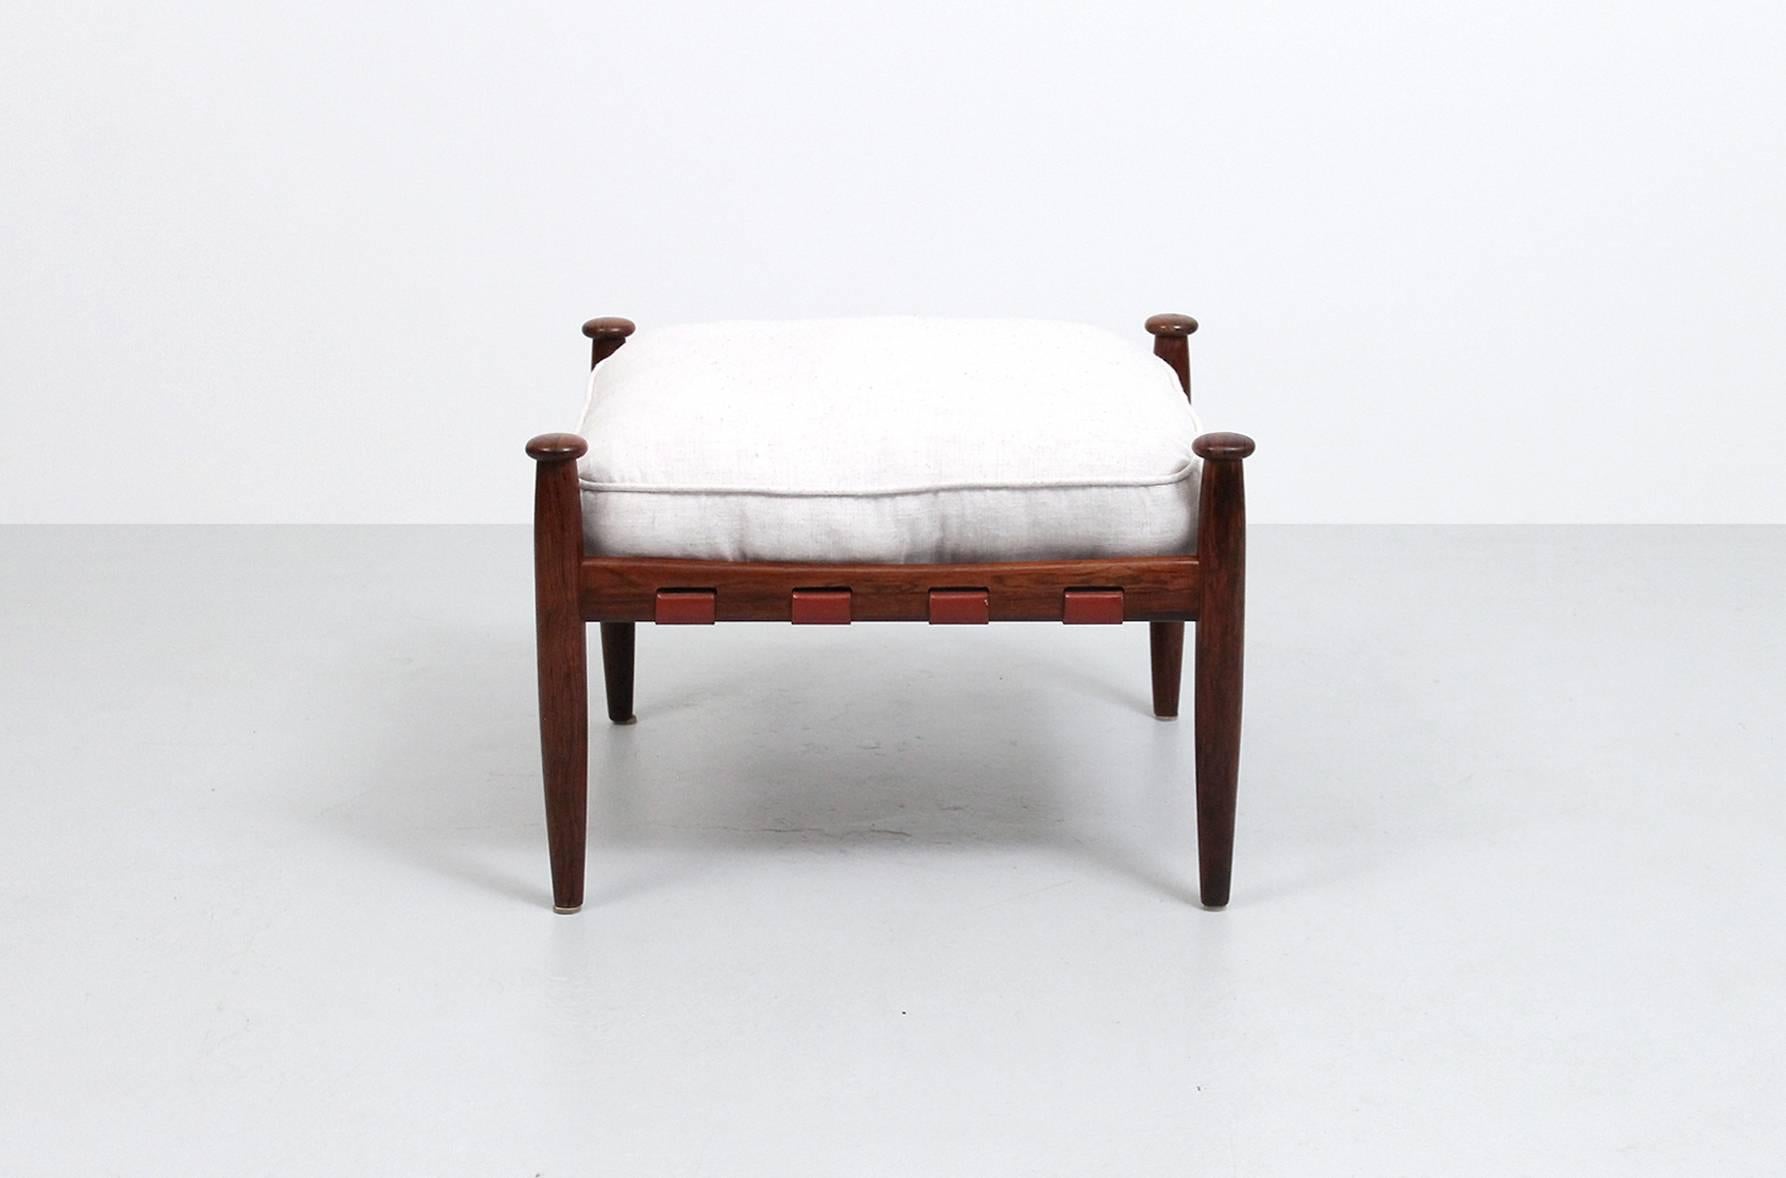 Safari style rosewood ottoman or stool with red leather strapping and loose upholstered cushion. Produced by Ire Möbler in Skillingaryd, Sweden.